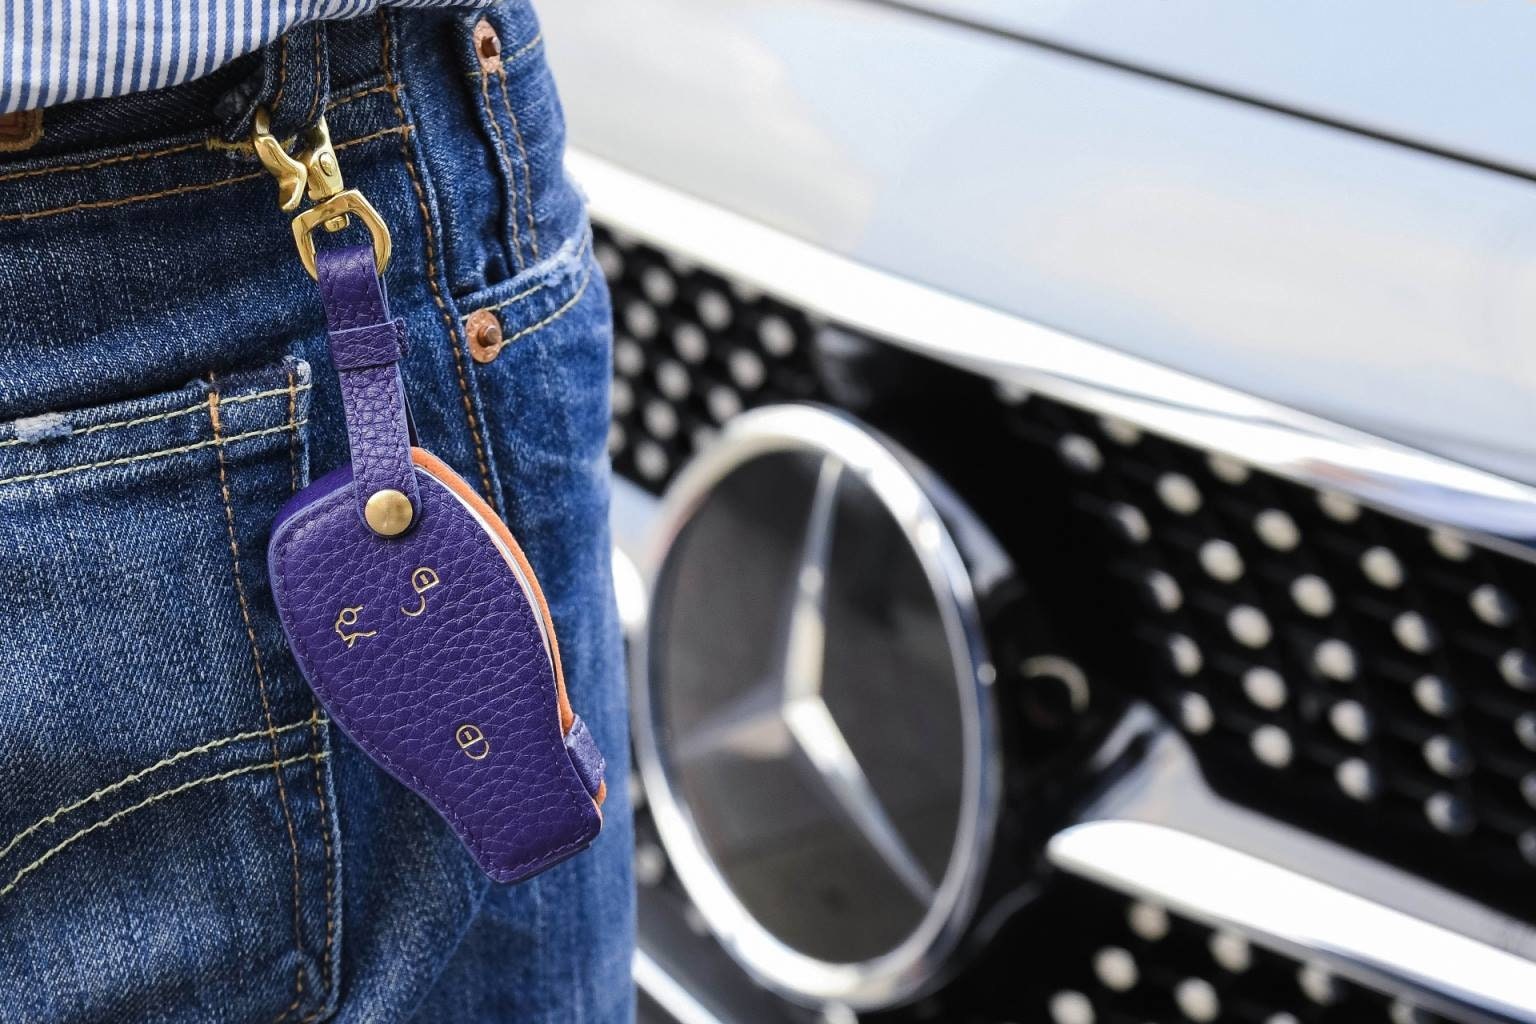 Mercedes Benz Car Key Leather Cover and Keychain in Black Pebble Grain  Leather 